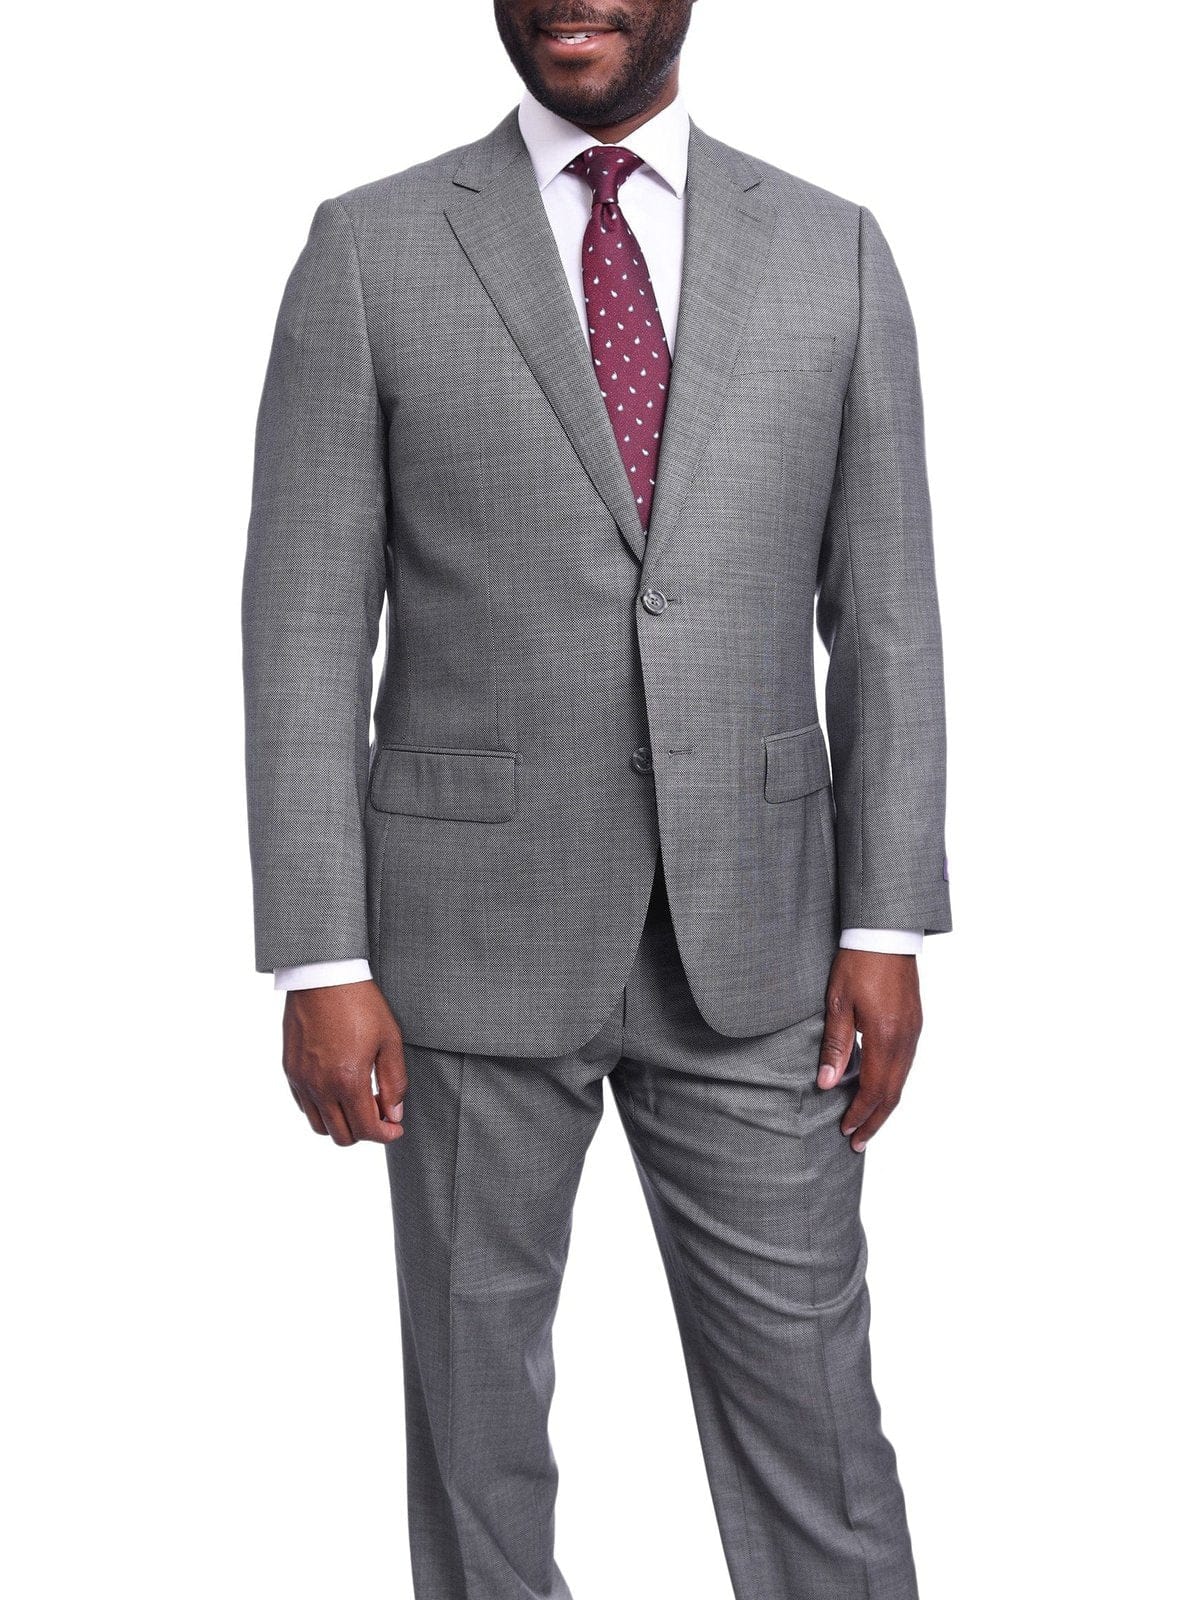 Napoli TWO PIECE SUITS Napoli Classic Fit Gray Birdseye Two Button Half Canvassed Wool Silk Blend Suit